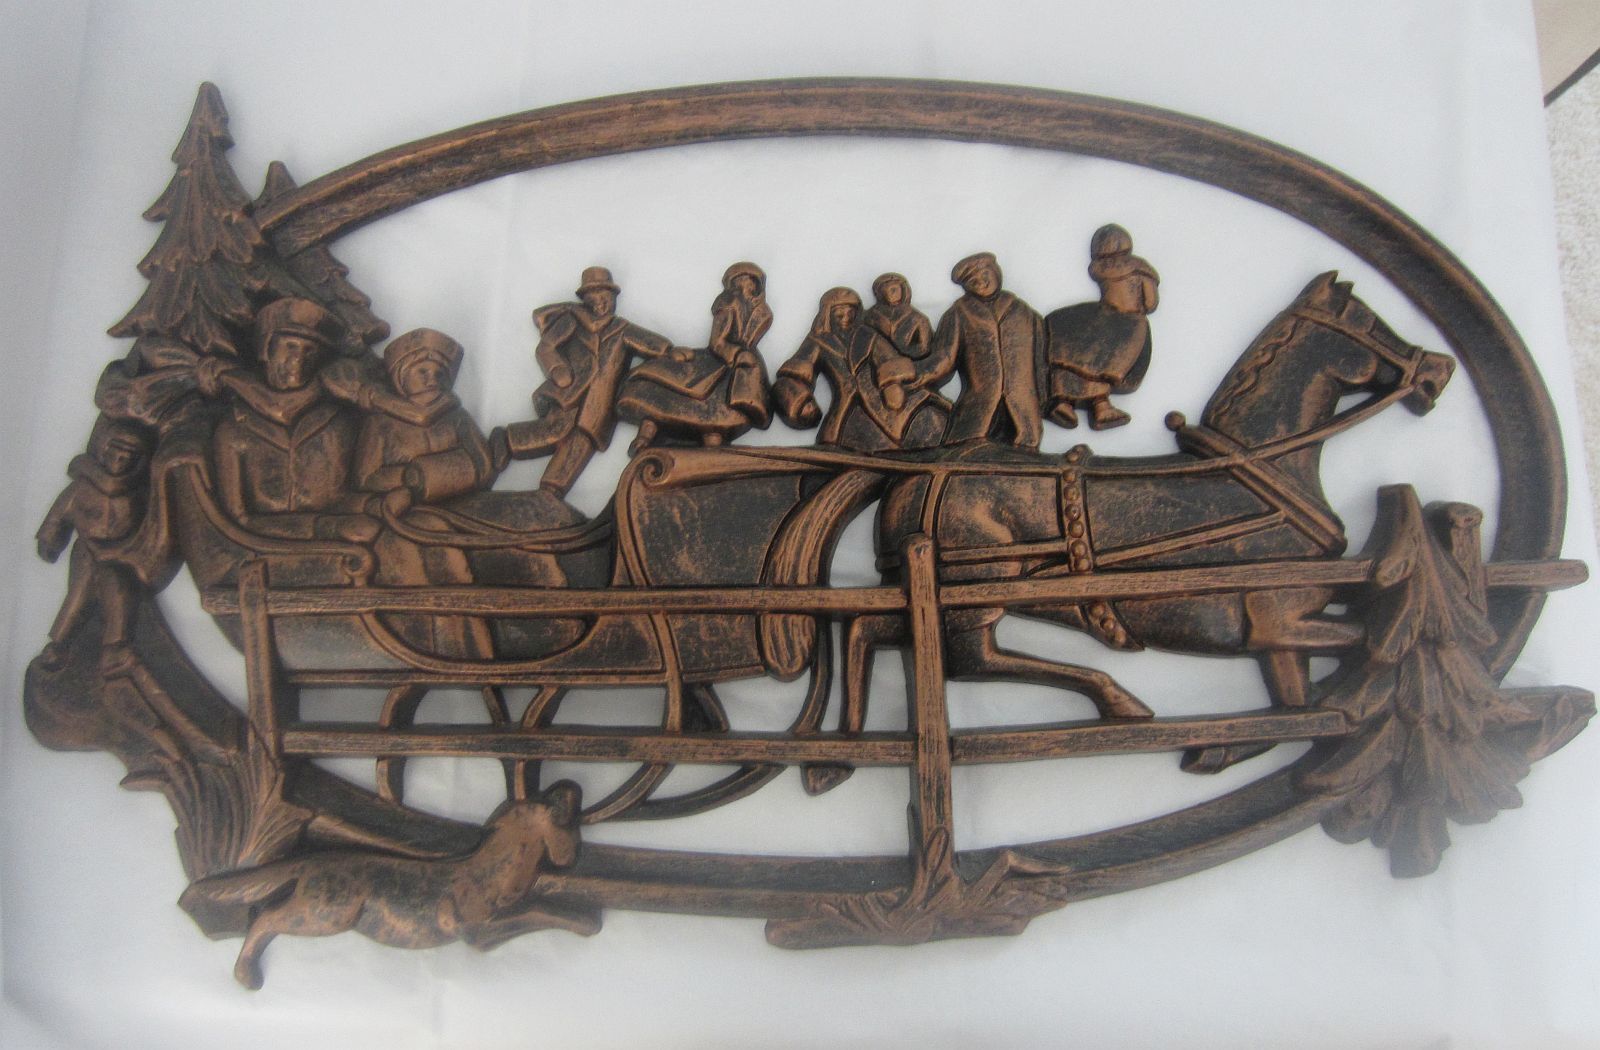 Vtg 1975 Syroco Coppercraft Guild Plastic Xmas Horse & Sleigh Wall Hanging #7327 - $23.99